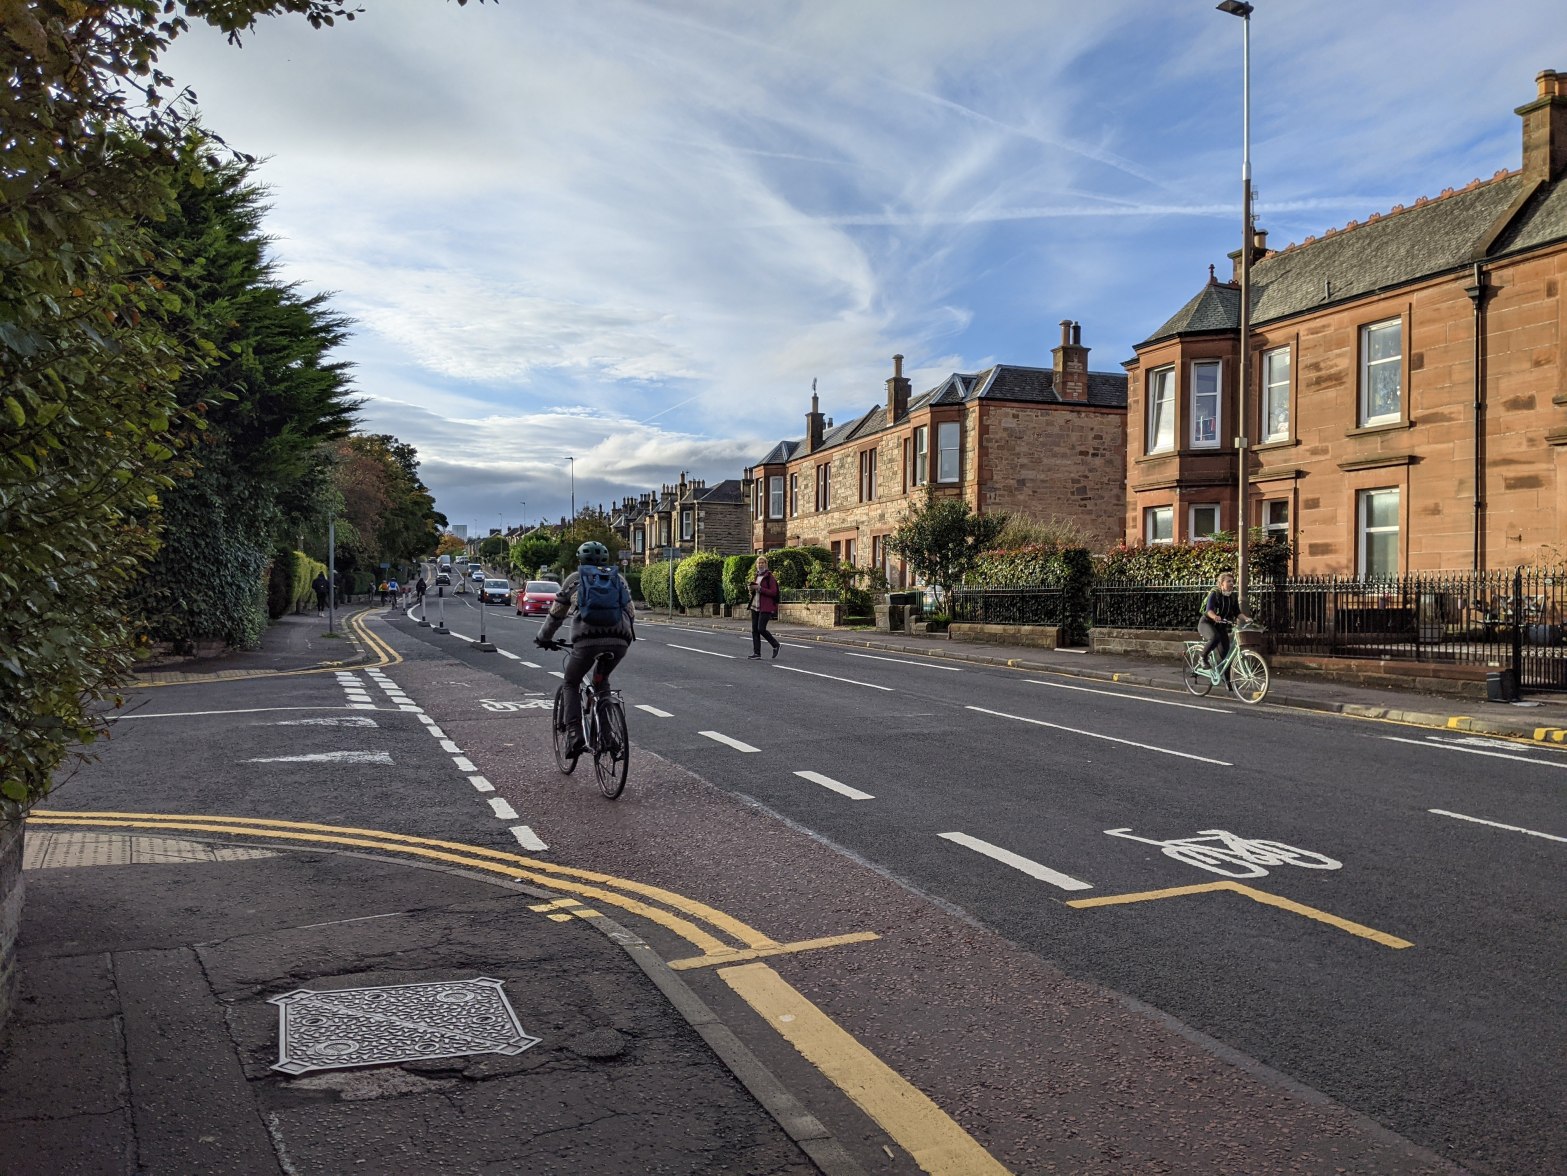 Photograph of a street with cycle lanes painted on either side. Cyclists can be seen on either side of the street. A pedestrian is crossing the road, looking unhurried. Trees are on the left hand side of the street; houses in honey coloured stone on the right.